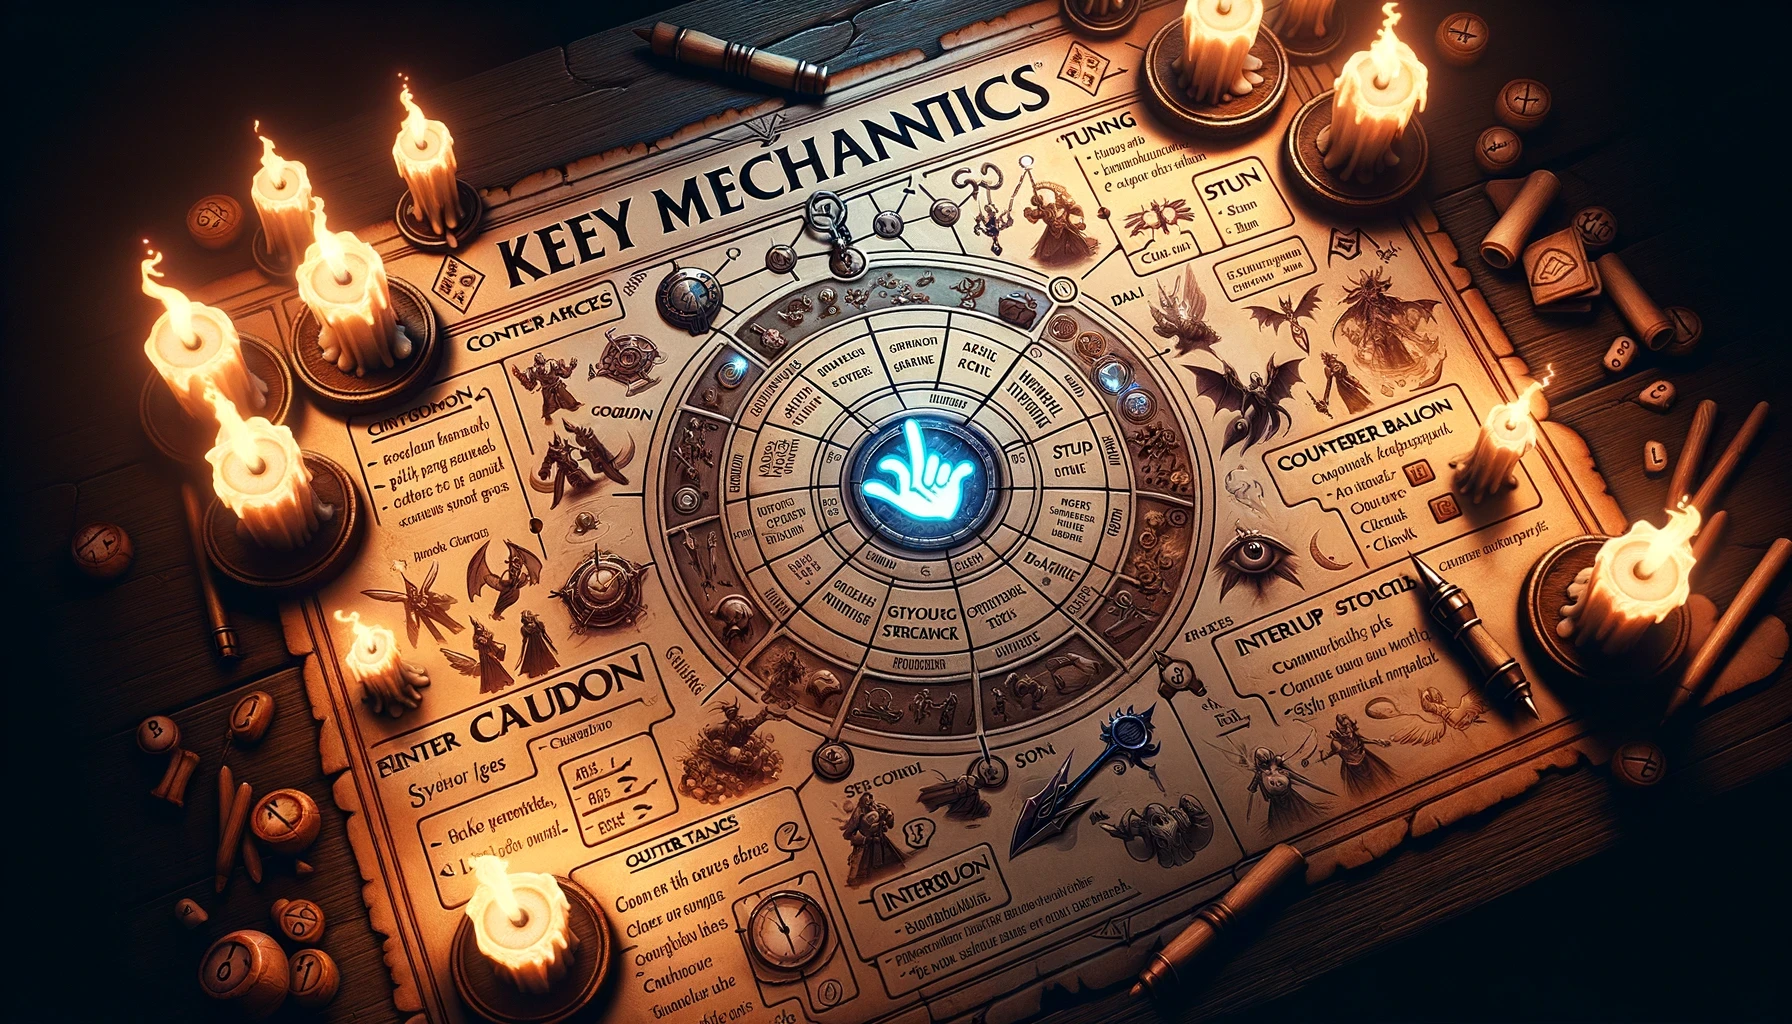 Representation of Key Mechanics and Their Precise Counter Strategies in mythic+